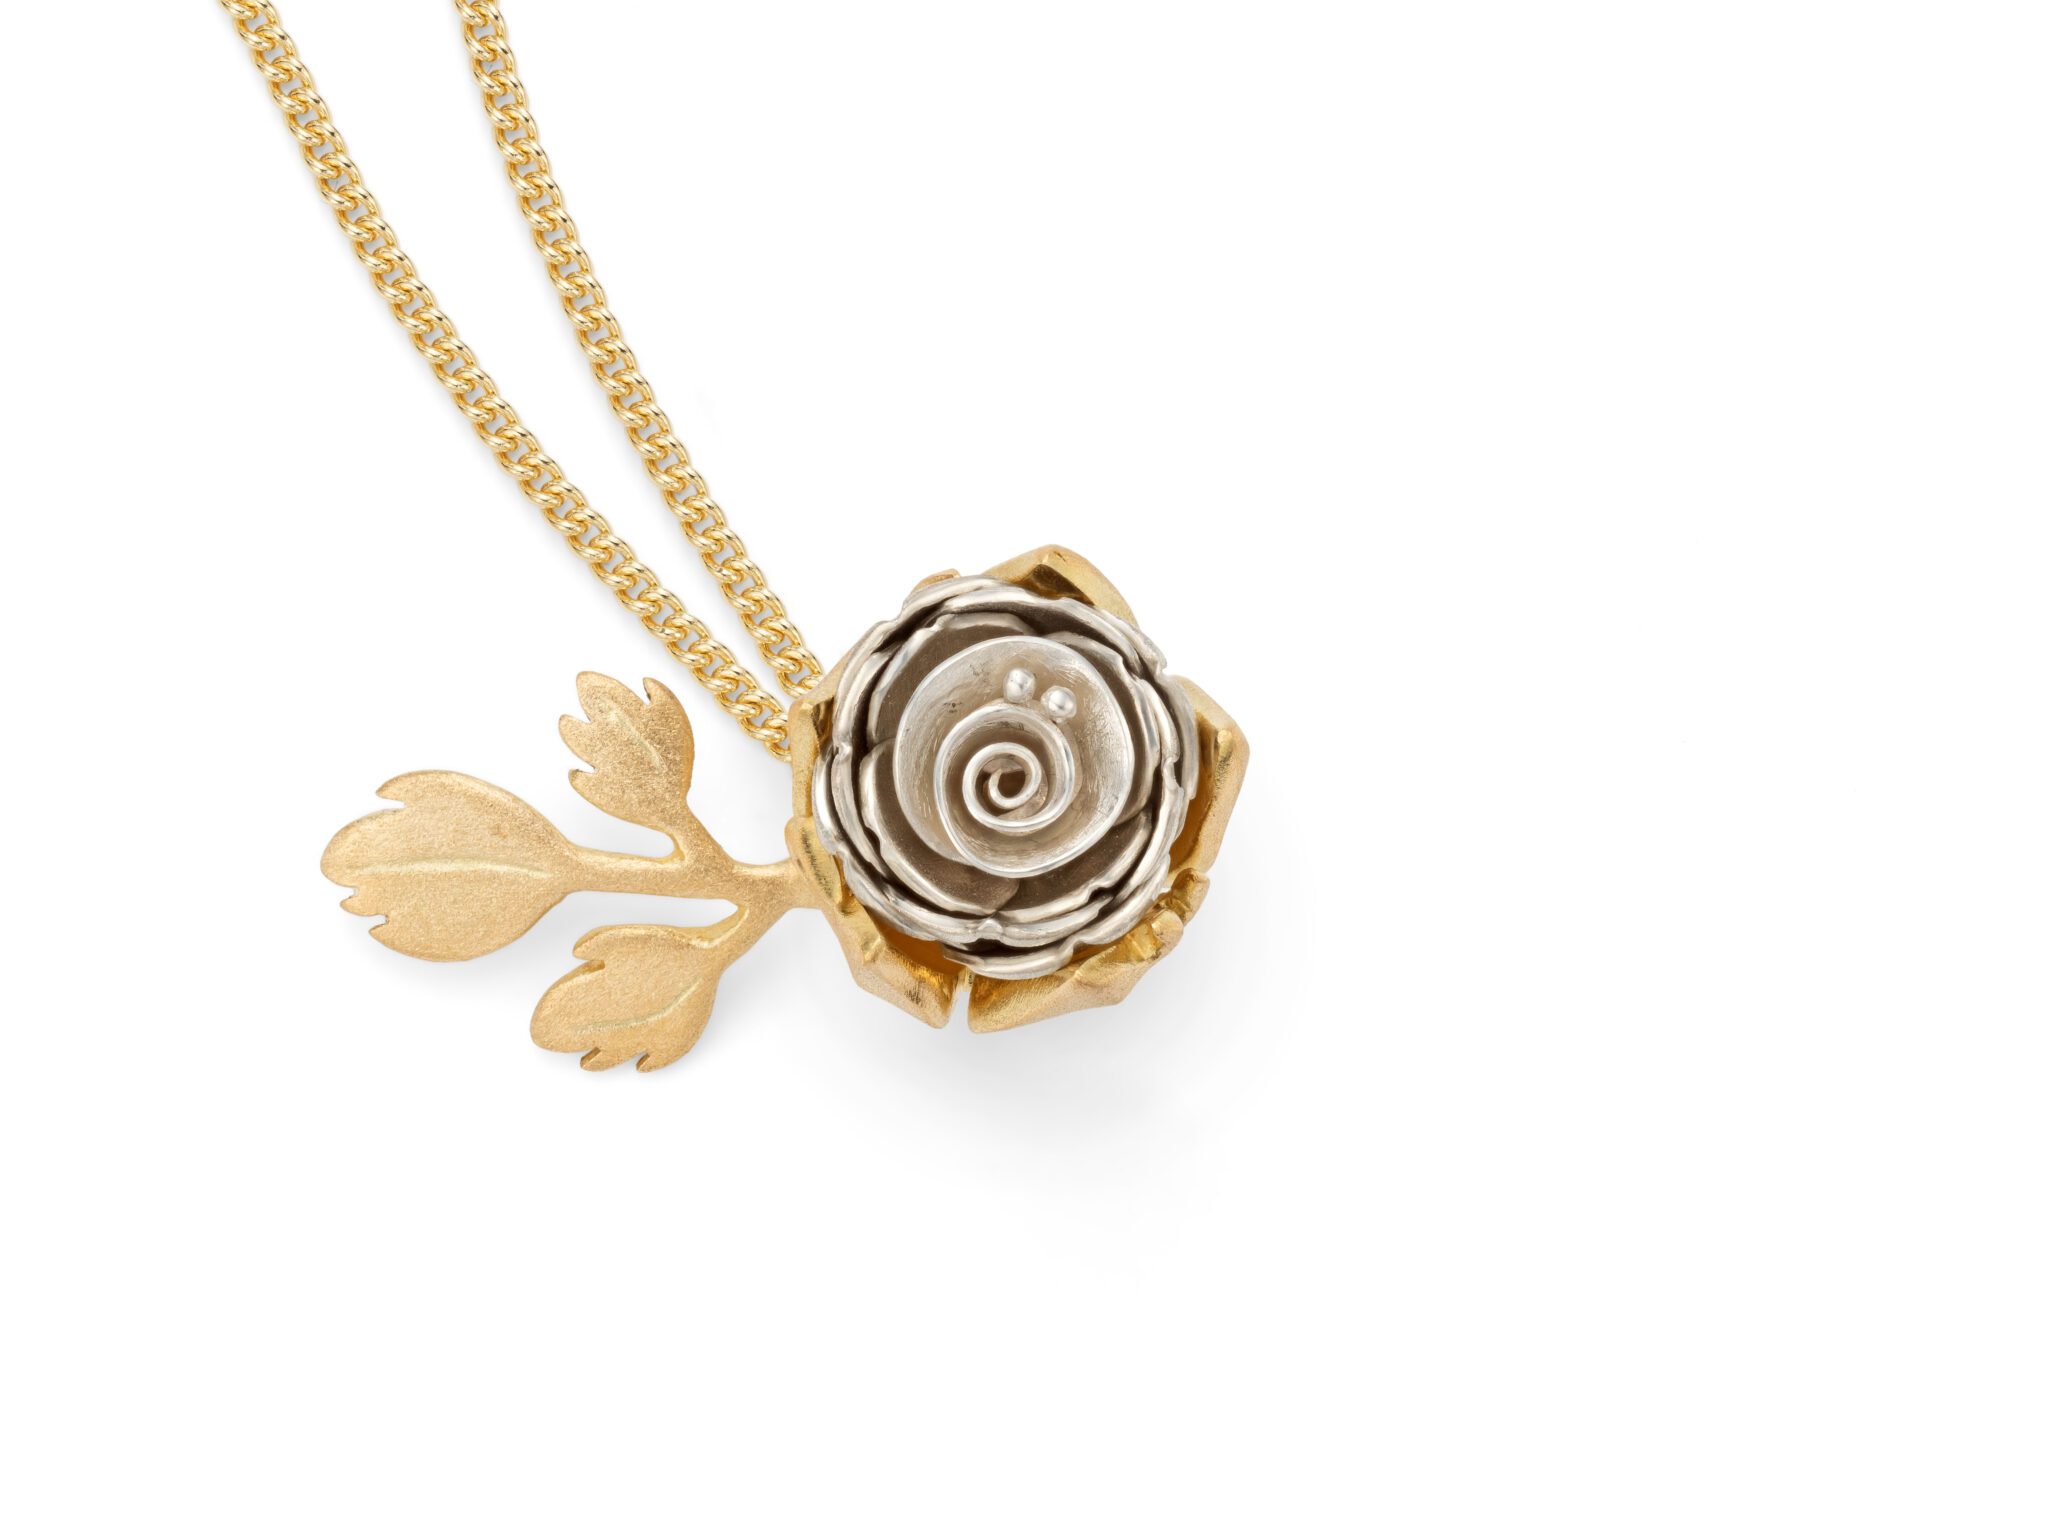 Buy the Rose Gold Mini Flower Pendant with Chain - Silberry